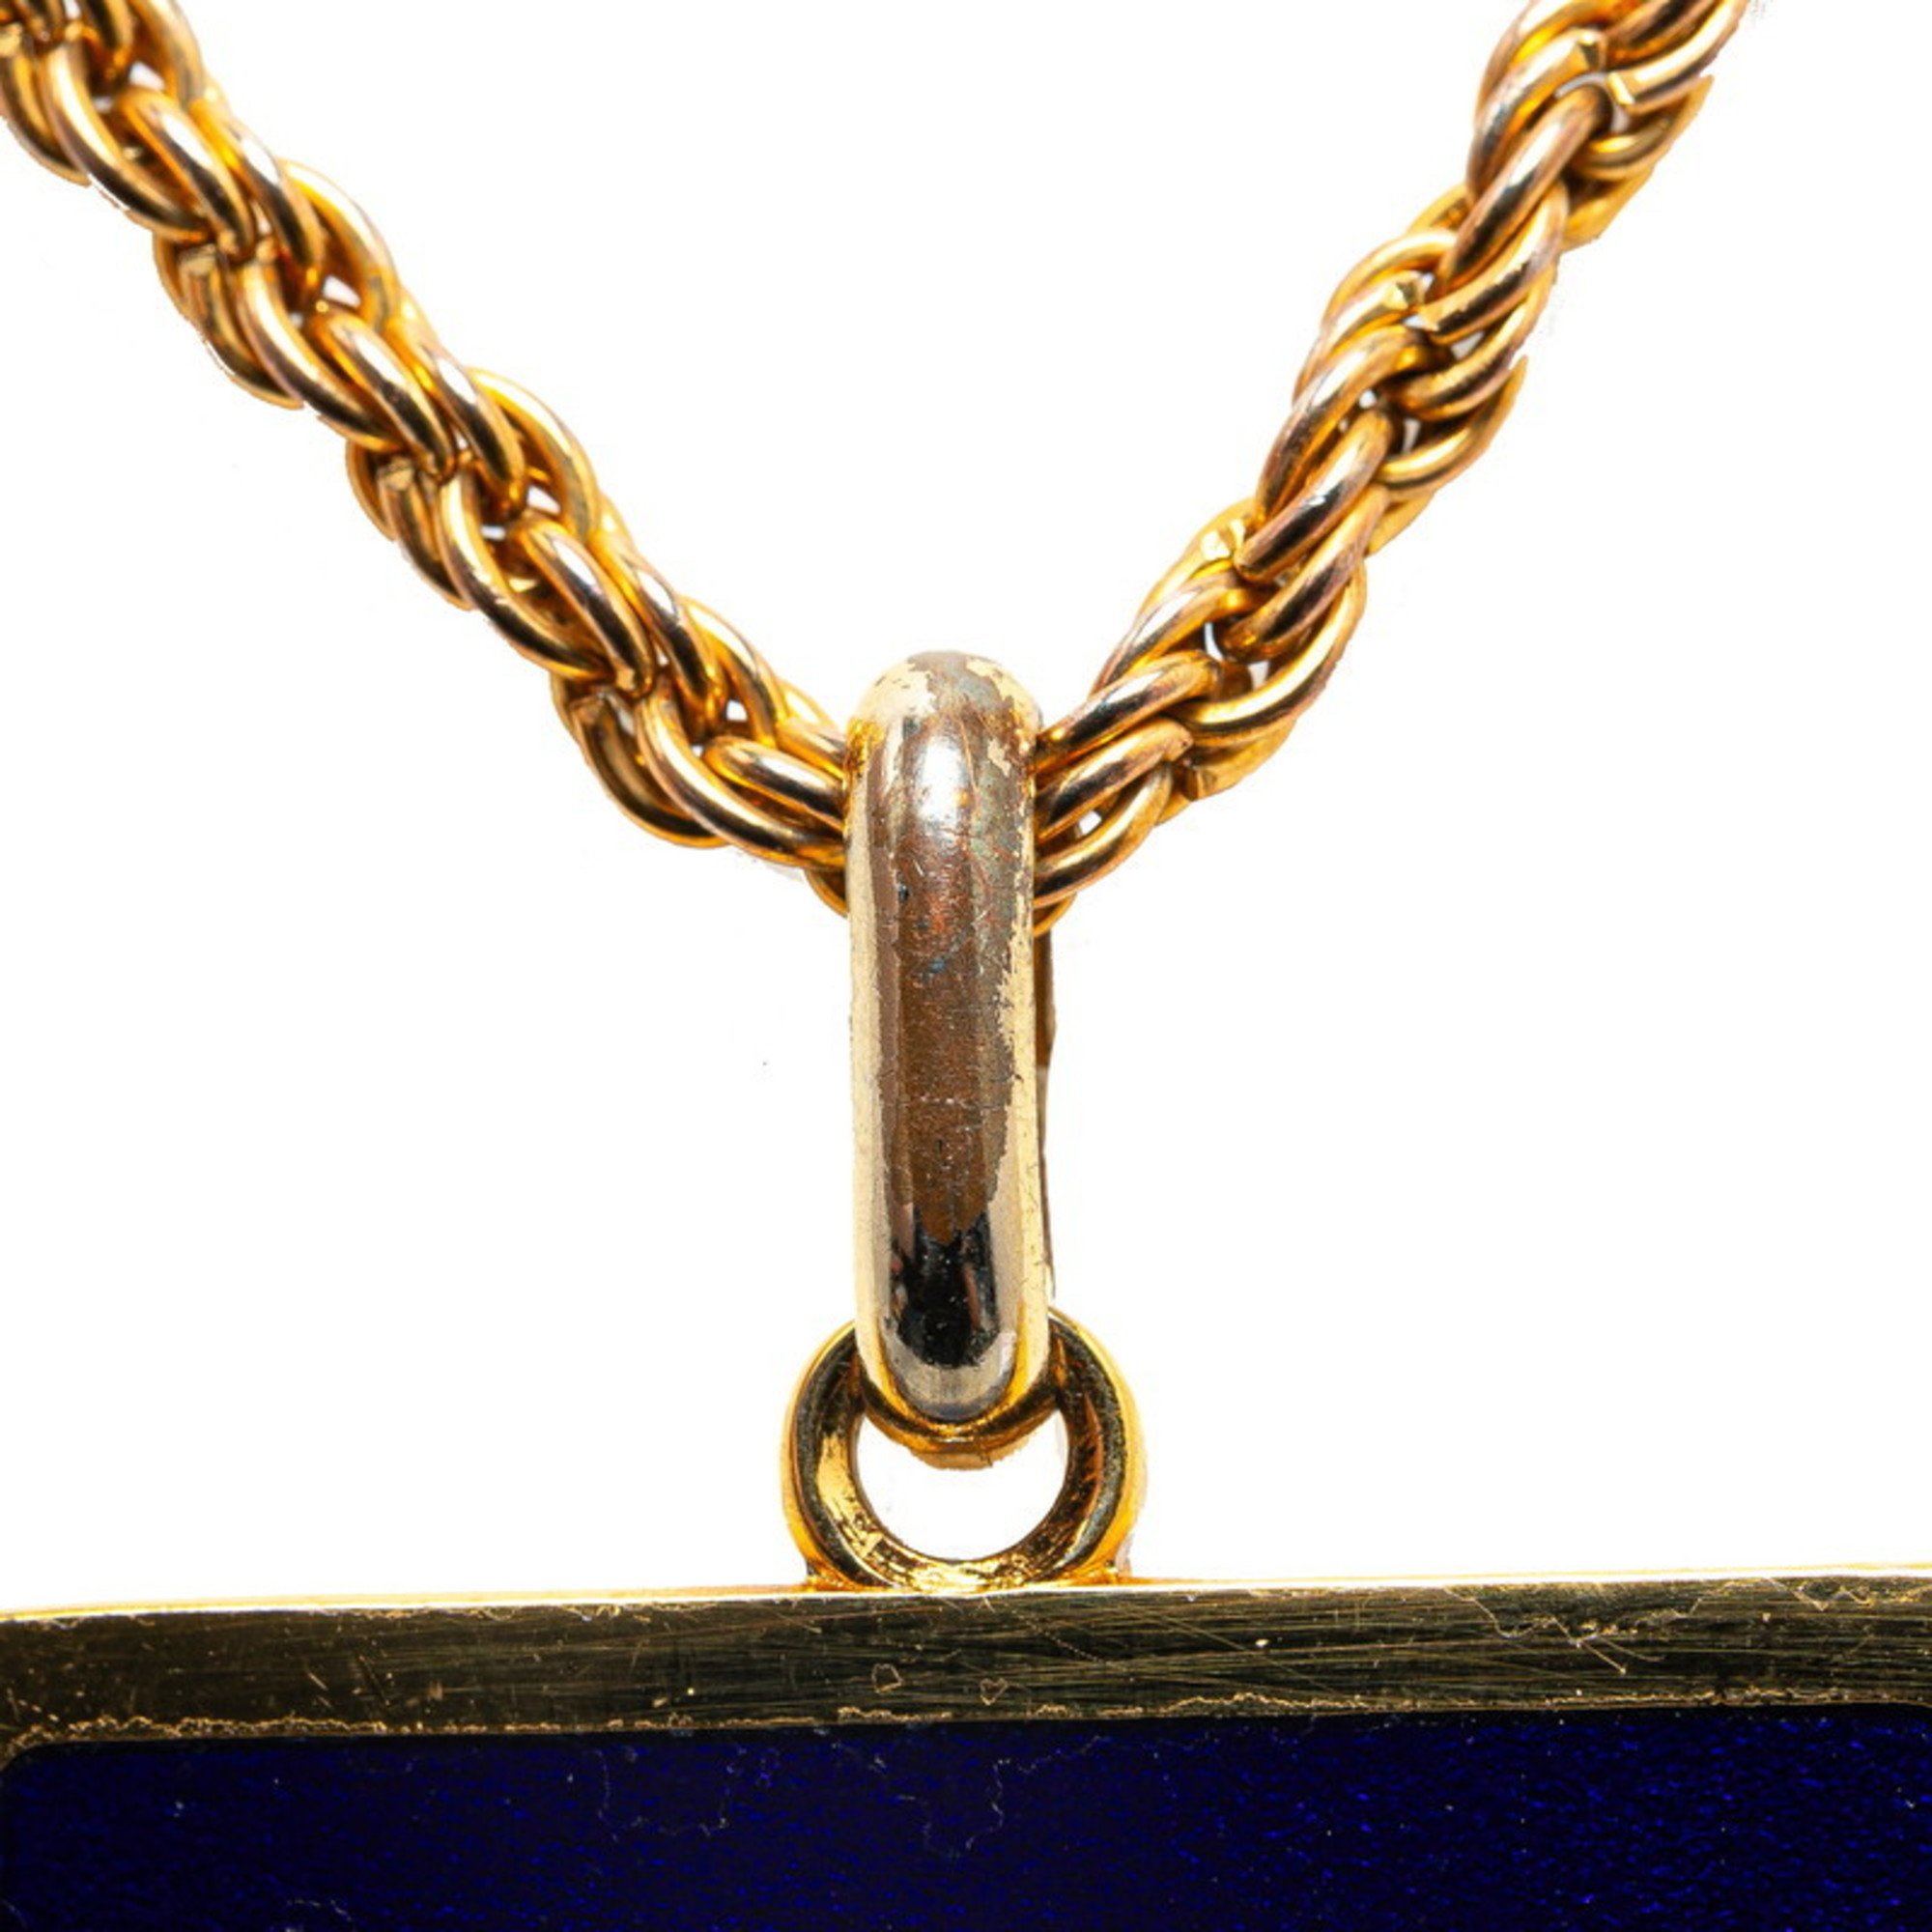 CELINE Carriage Plate Necklace Gold Blue Plated Women's